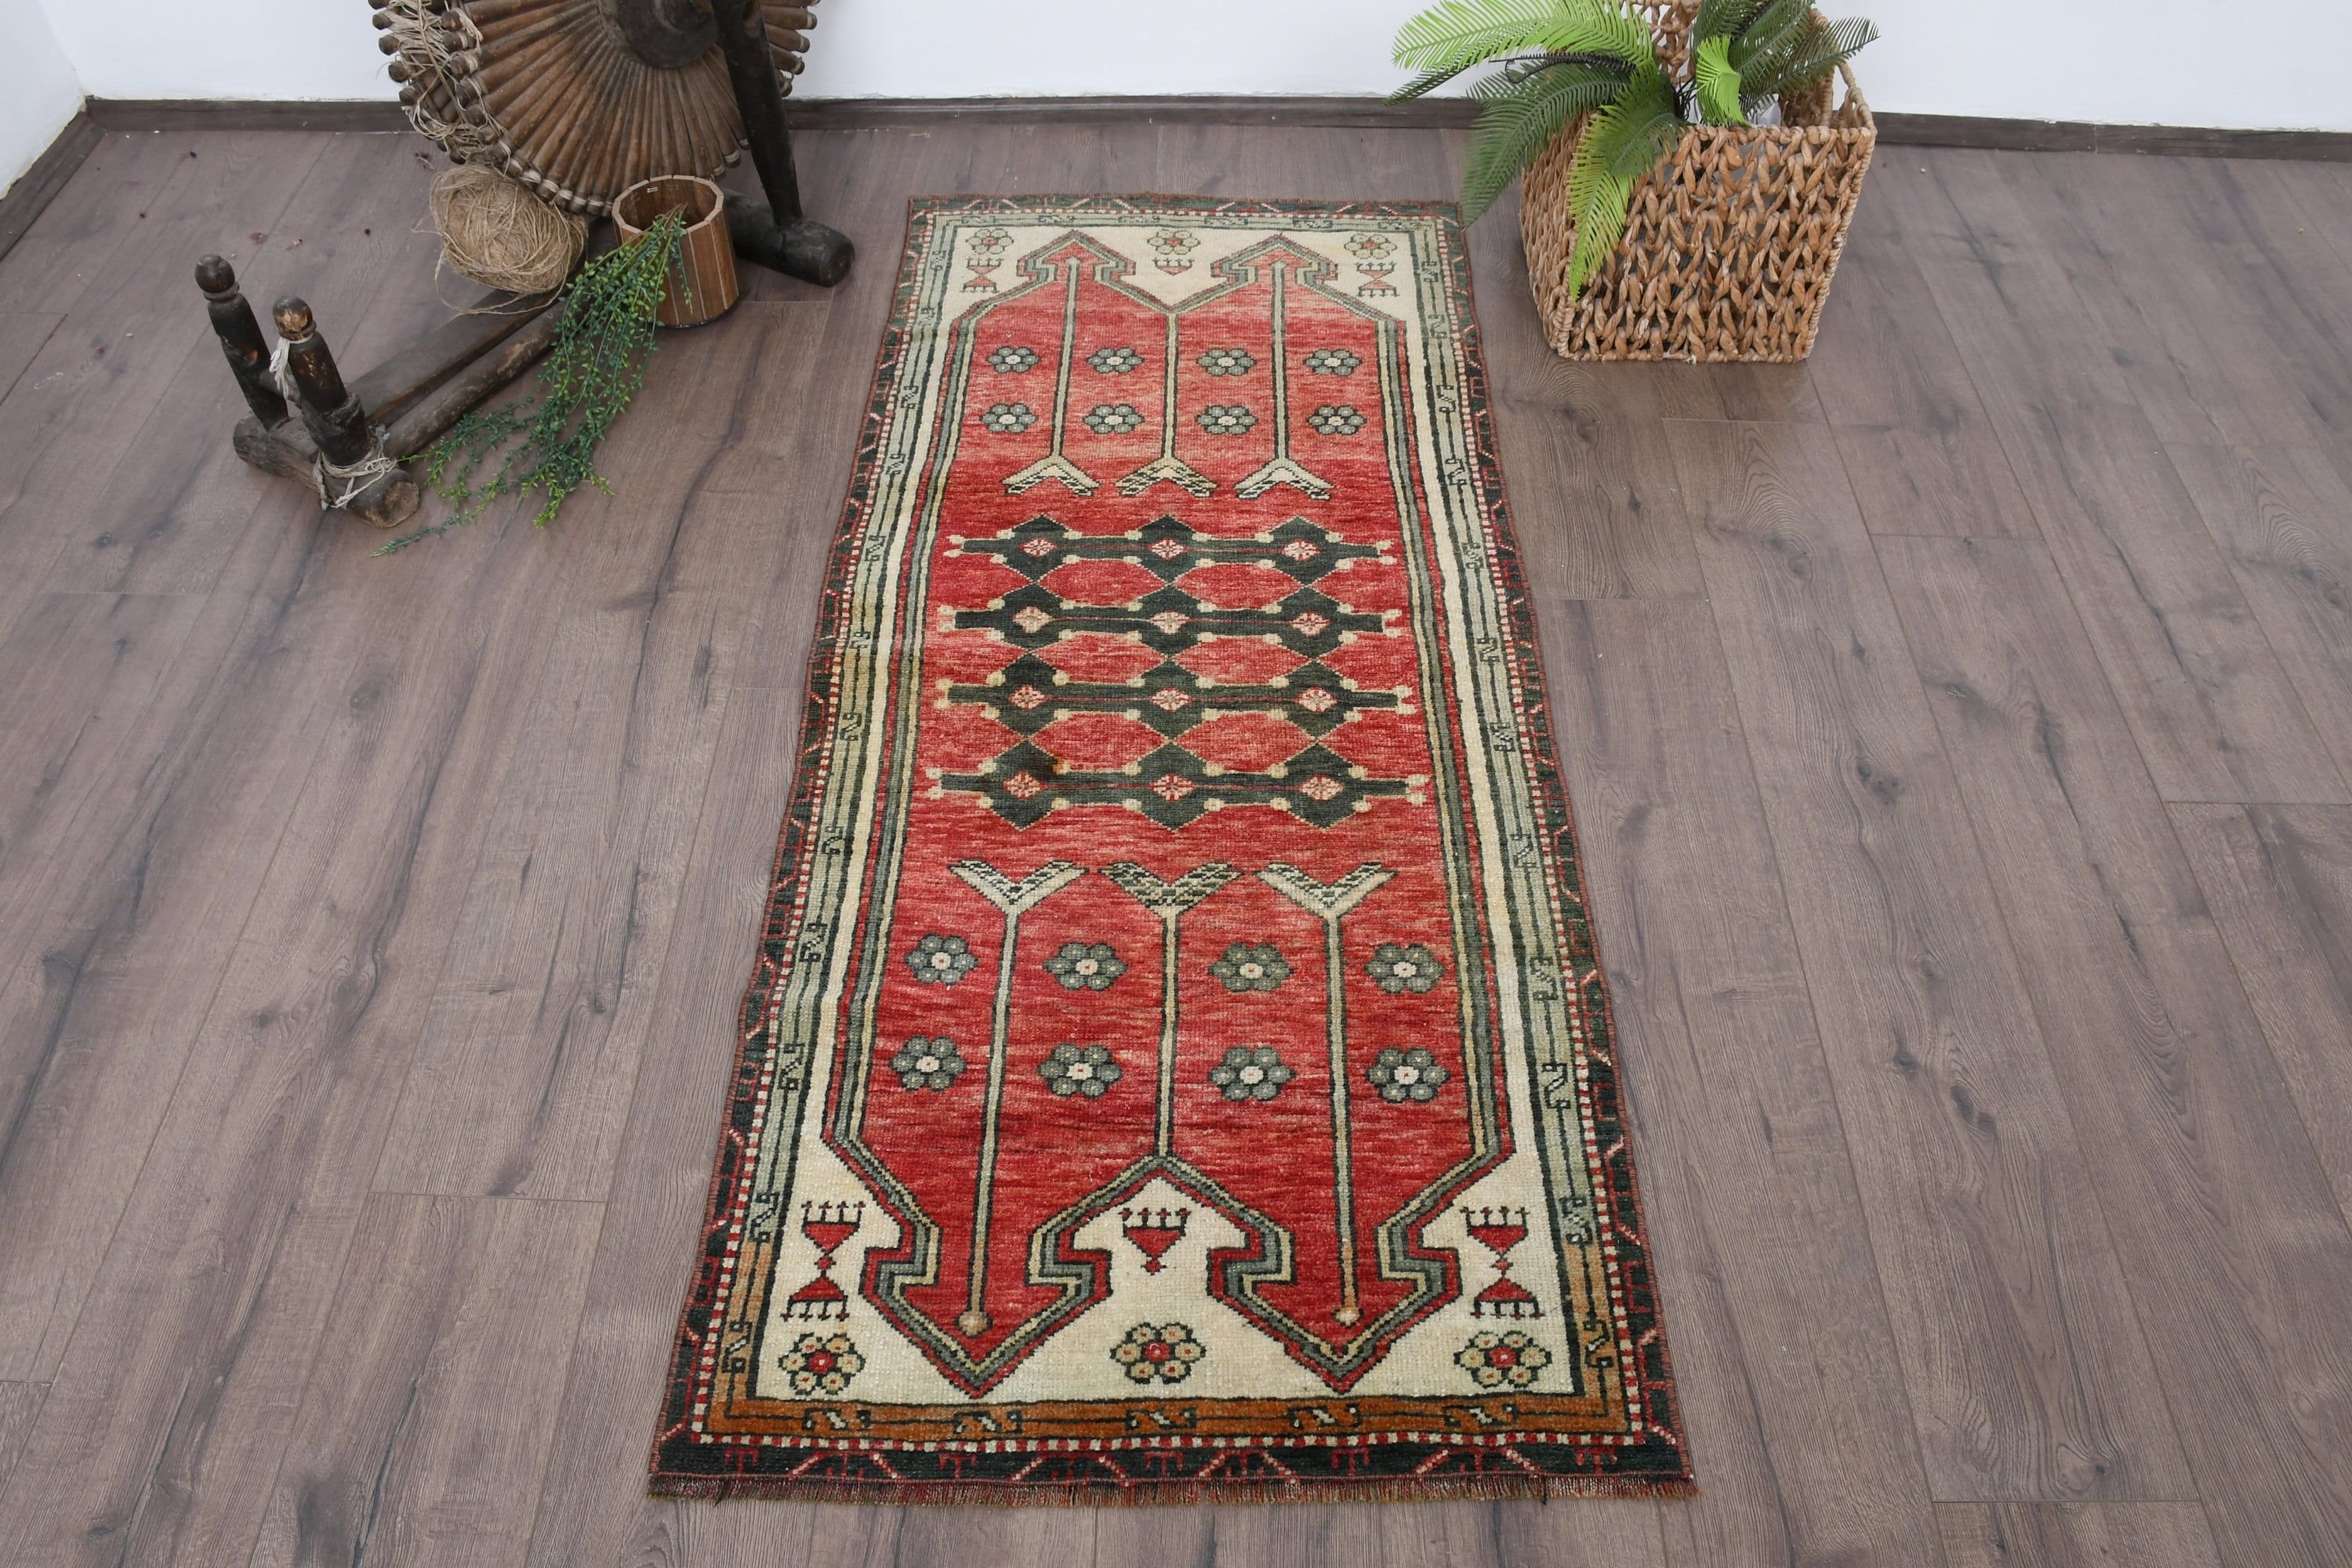 Red Antique Rug, Moroccan Rugs, Vintage Rug, Car Mat Rugs, 2.3x5.3 ft Small Rug, Turkish Rug, Entryway Rug Rugs, Kitchen Rug